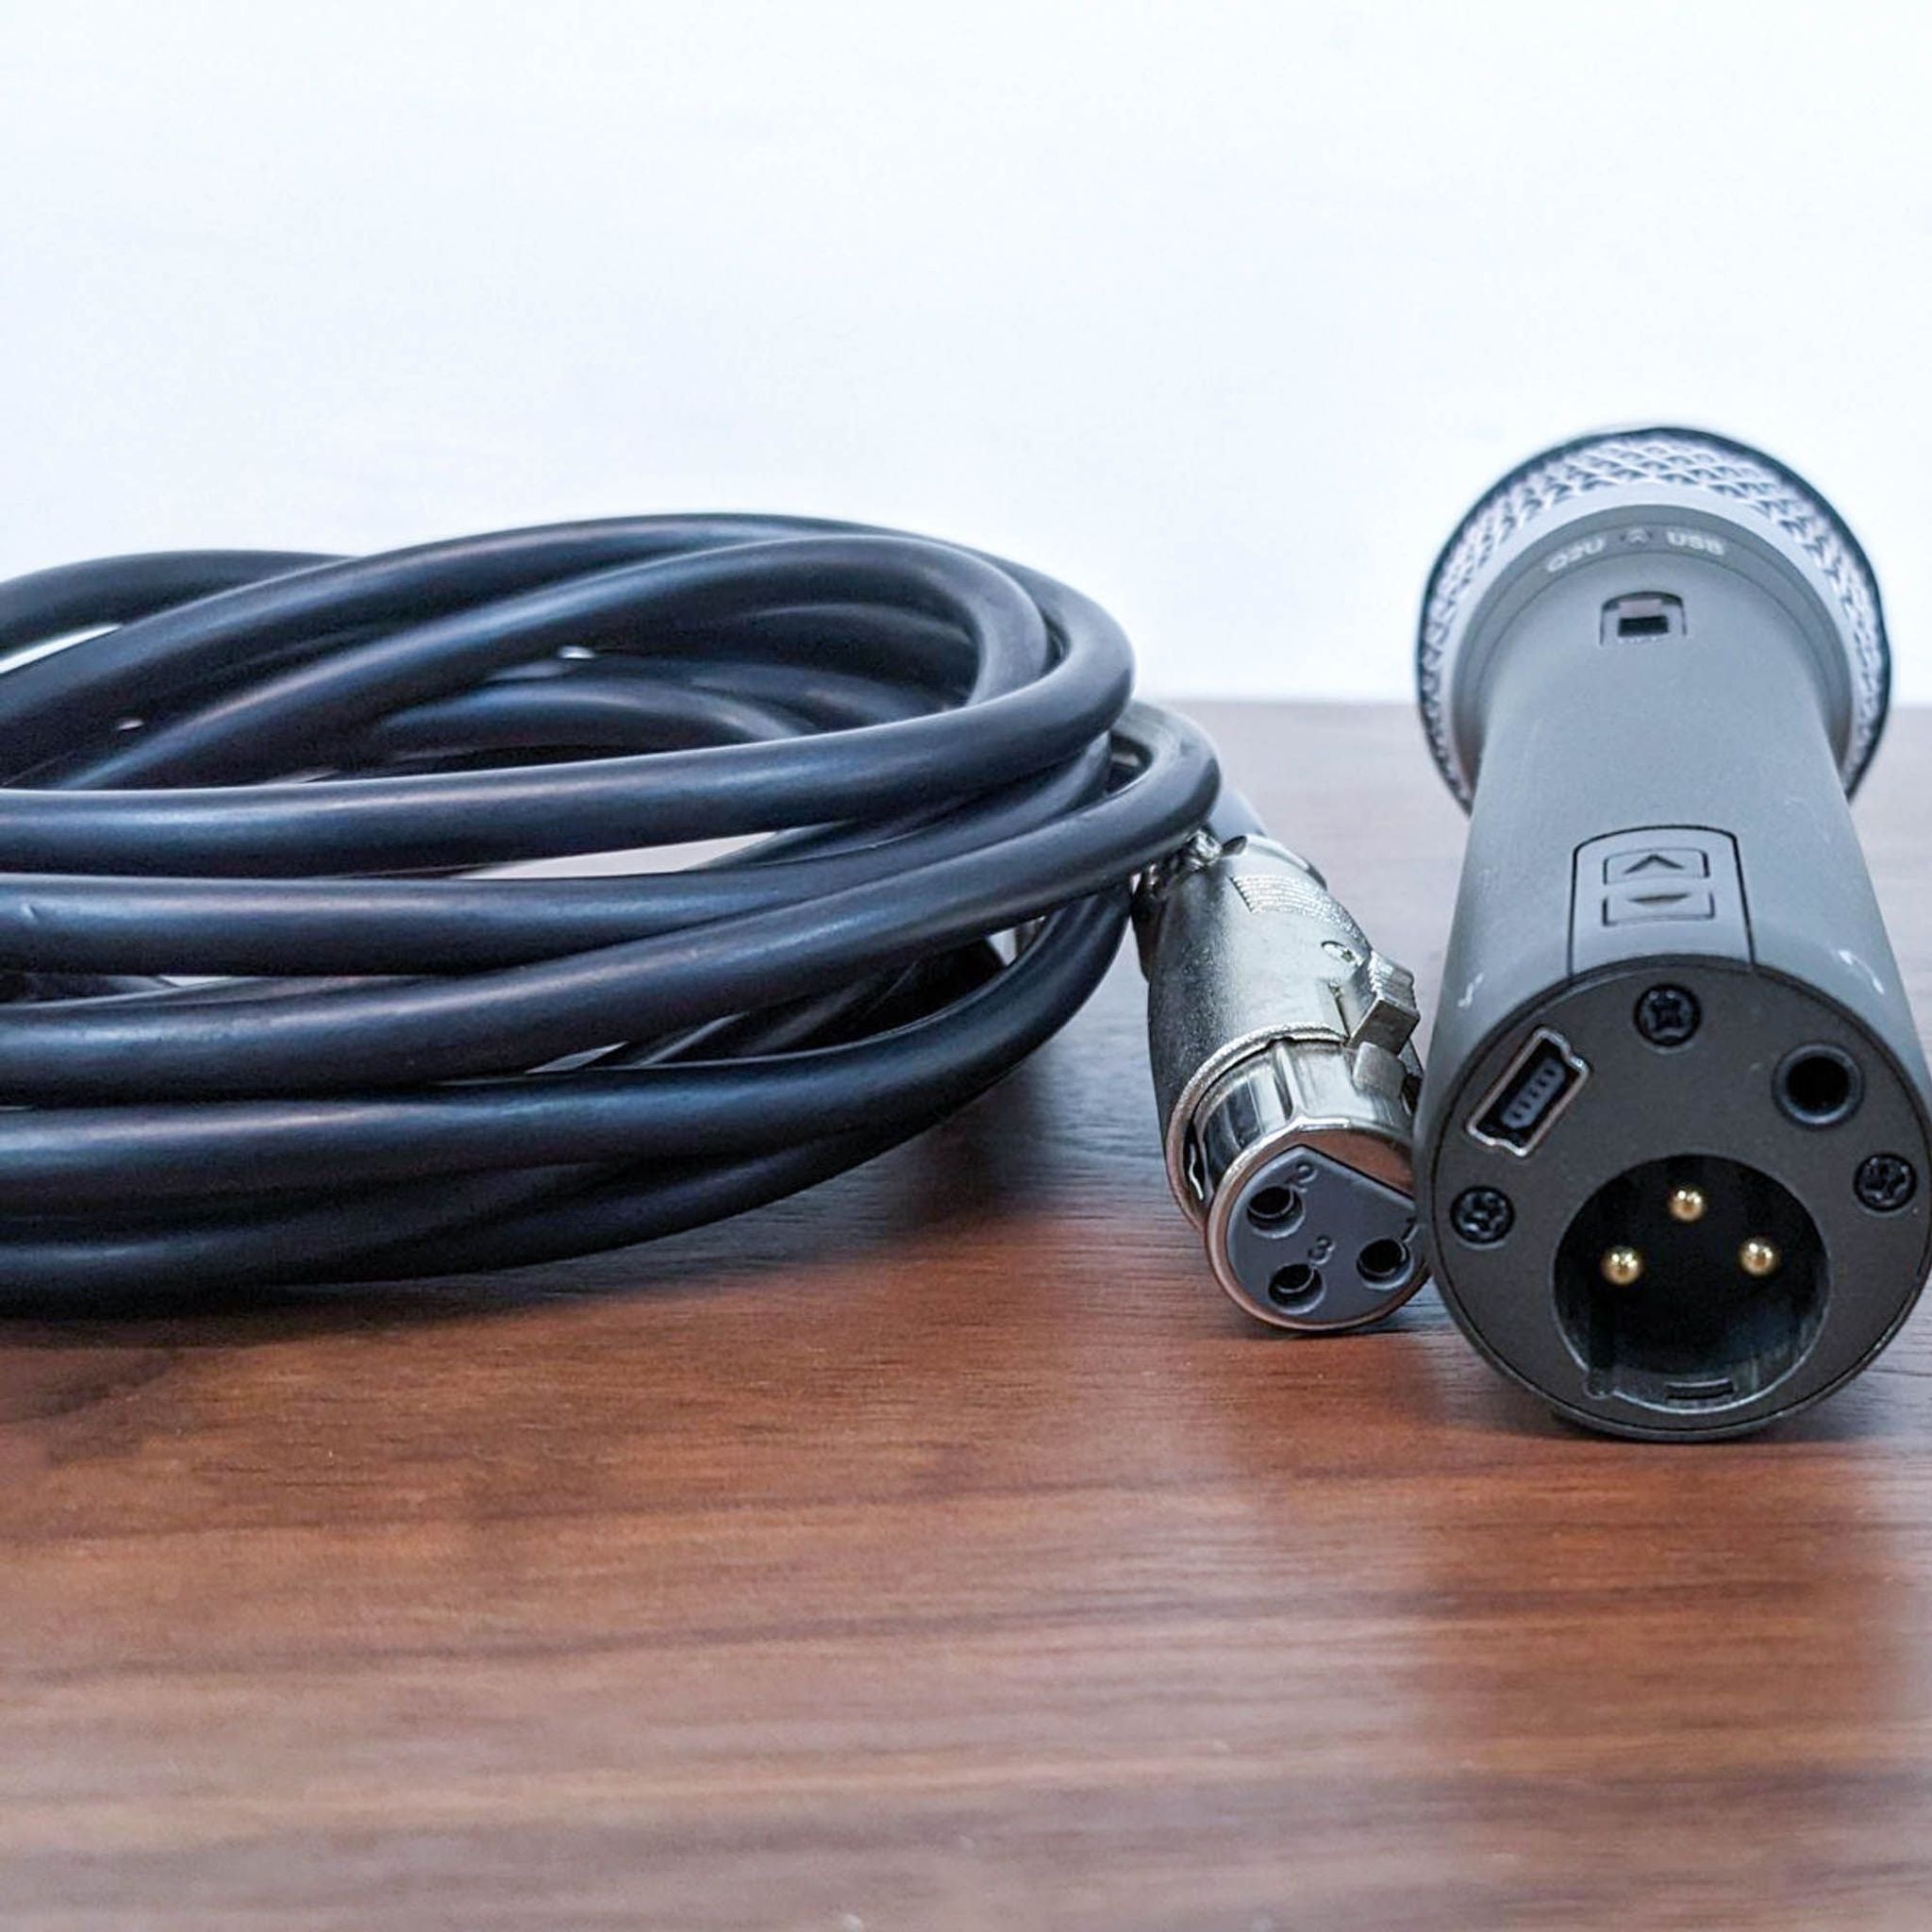 2. Close-up of the Samson Q2U microphone and cable connectors, highlighting its dual output options for high-quality sound capture.